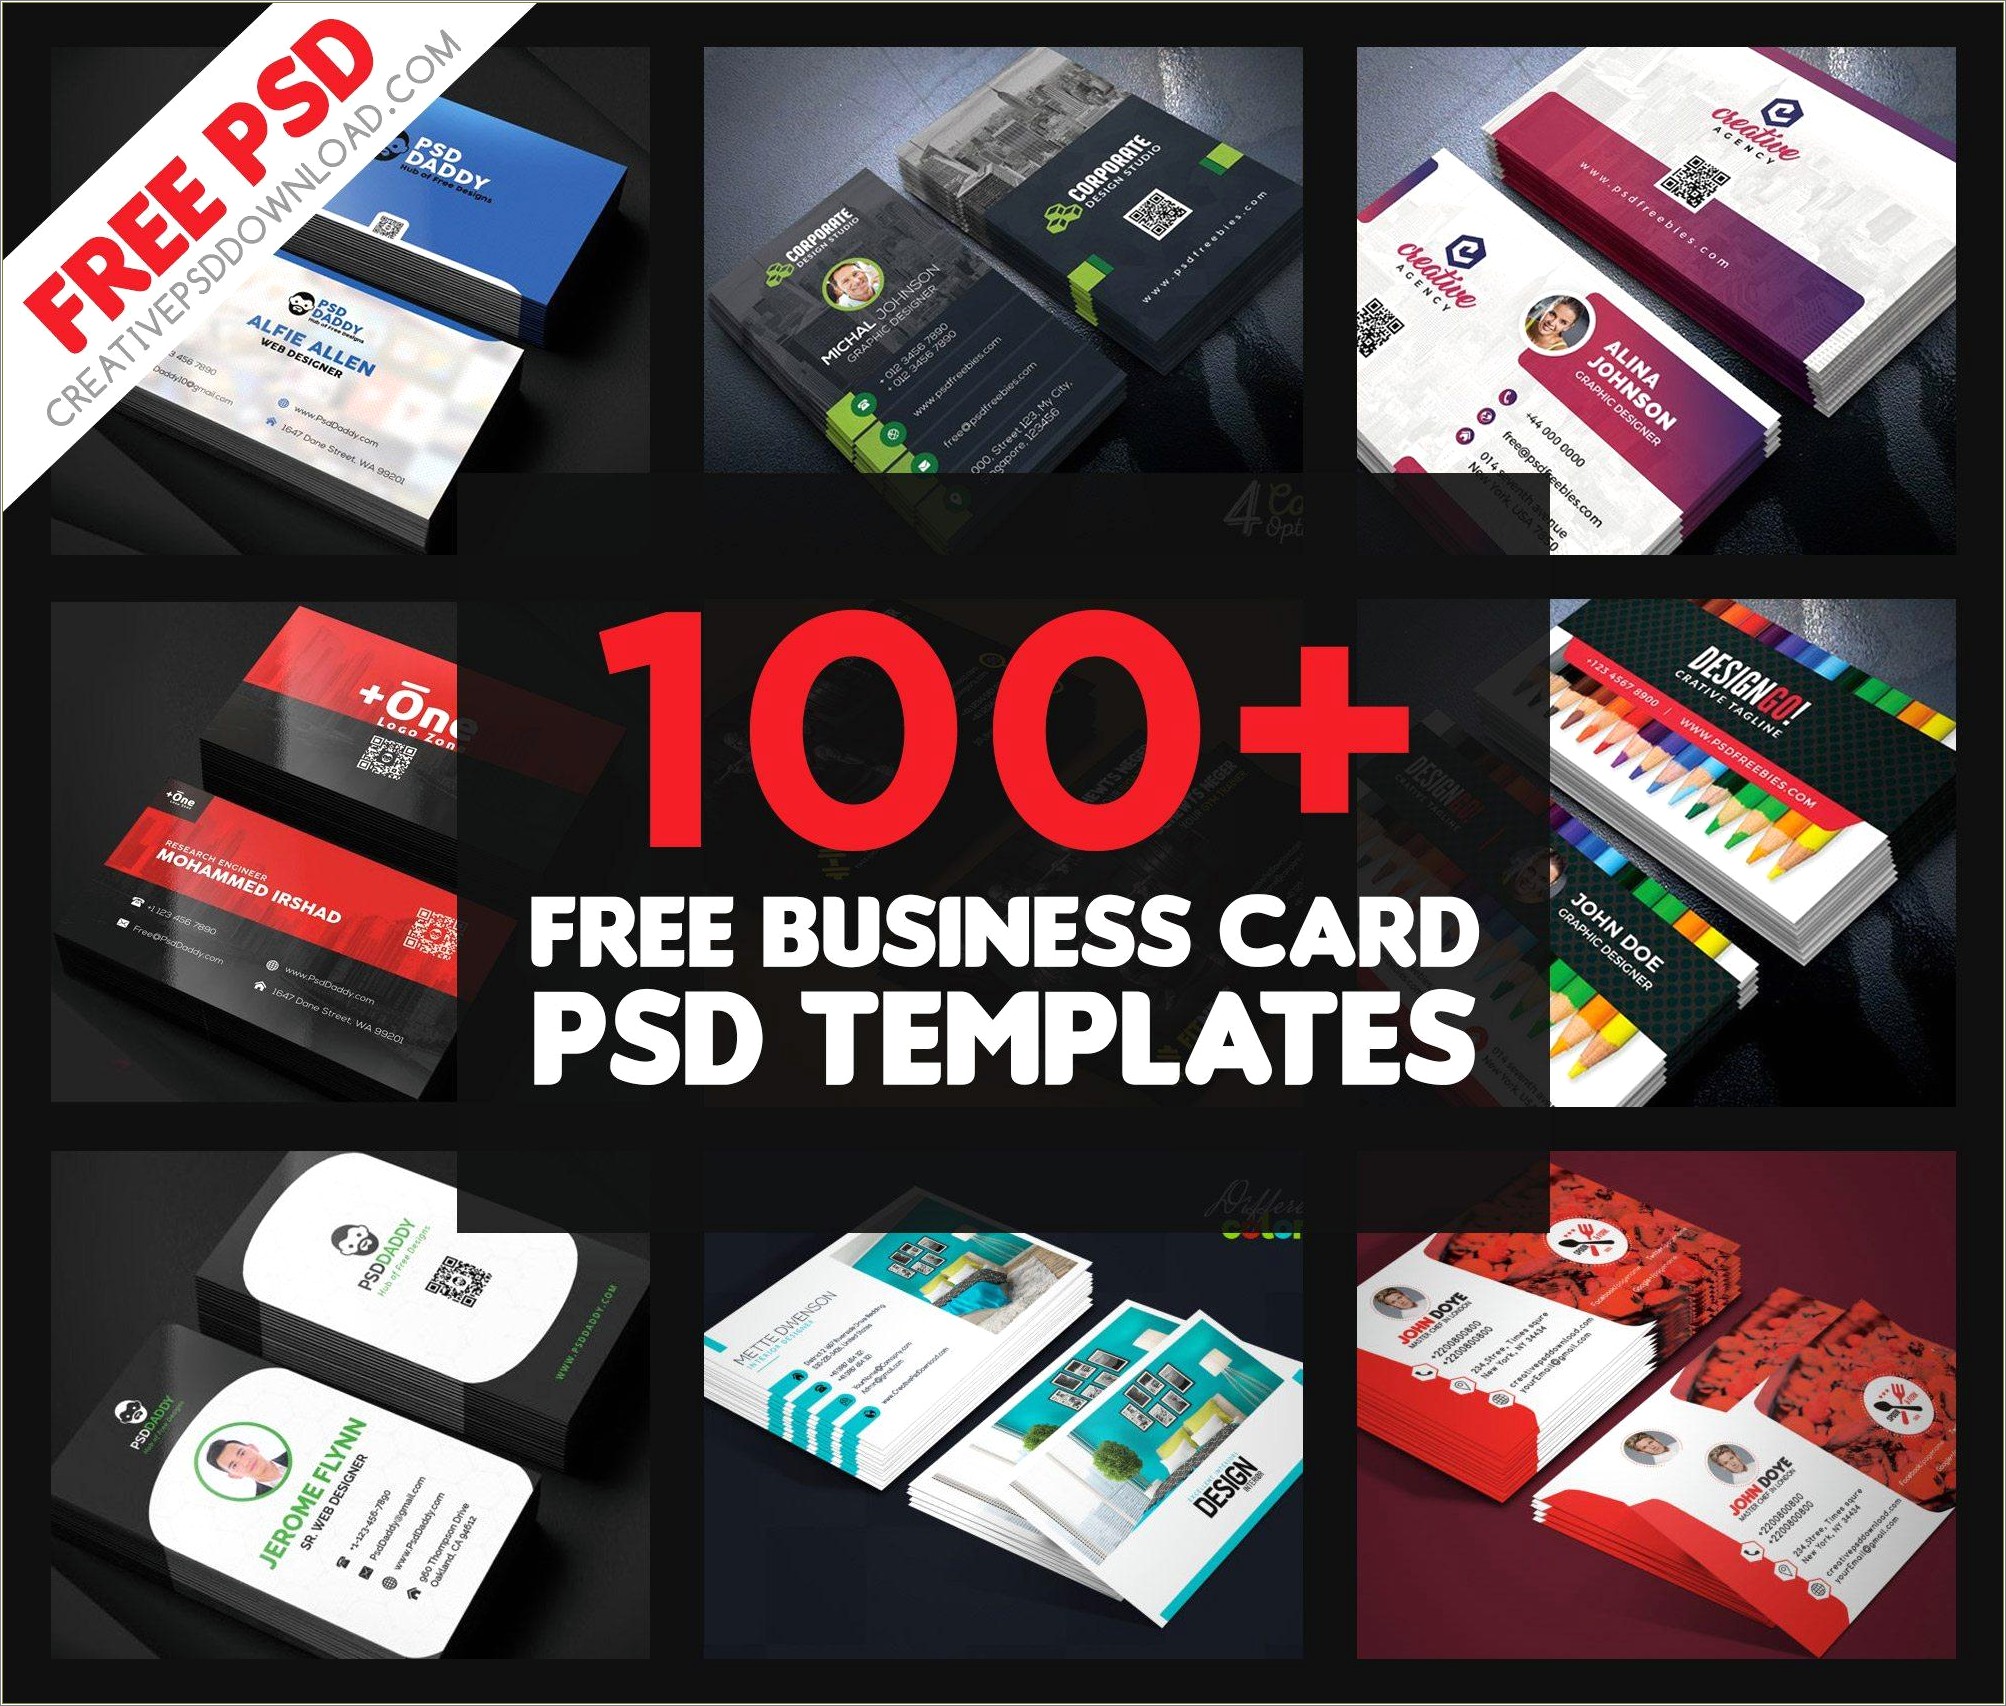 Free Business Card Templates To Print At Home